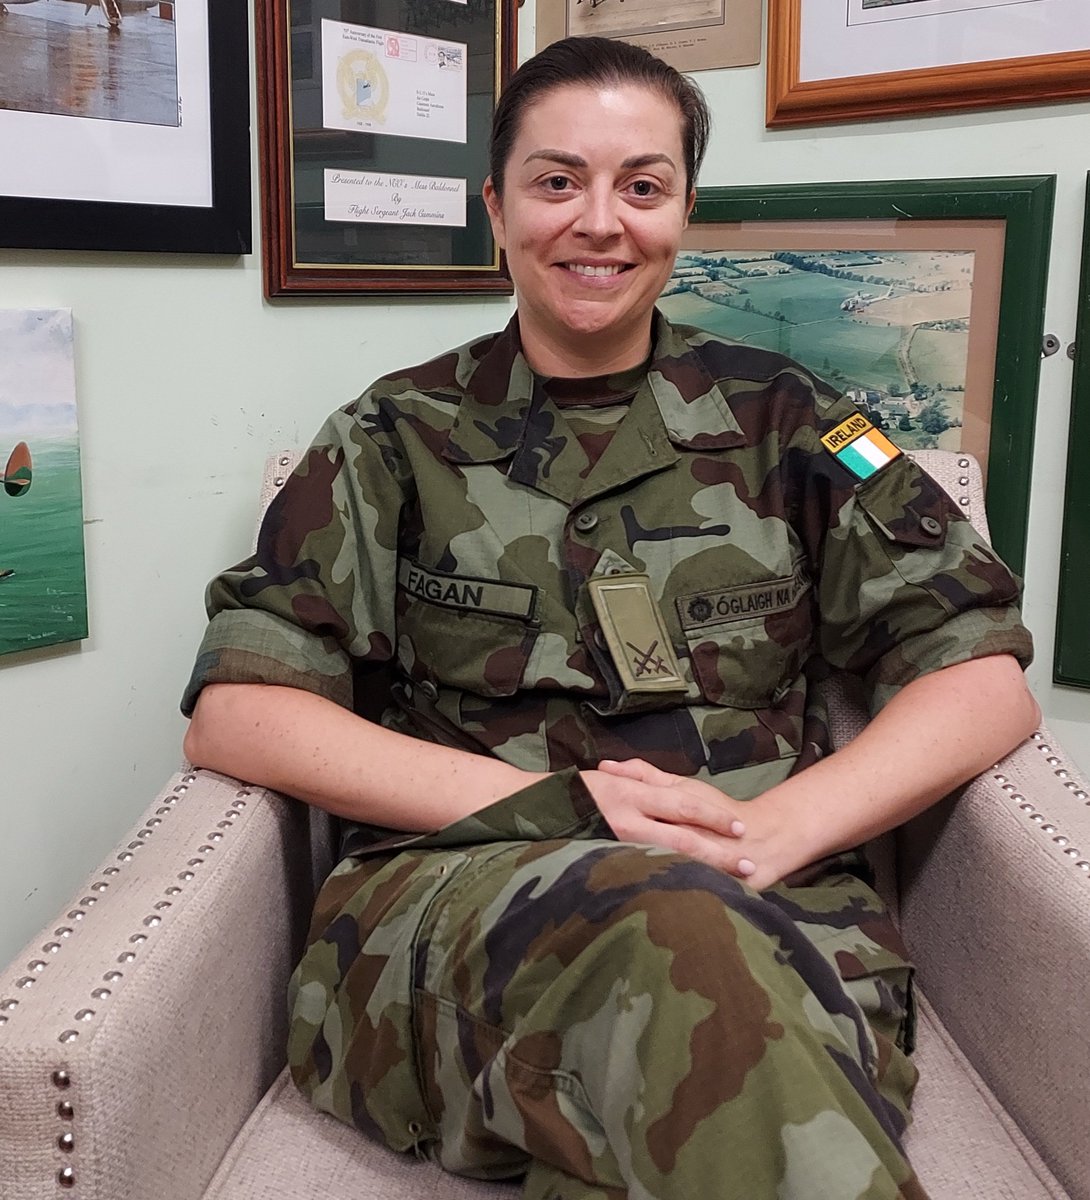 Today I collected the voice, memories & experiences of Commandant Gemma Fagan - Defence Forces Press Officer, for the Military Archives of Ireland #OralHistory Programme #soldier #leader #peacekeeper #officer